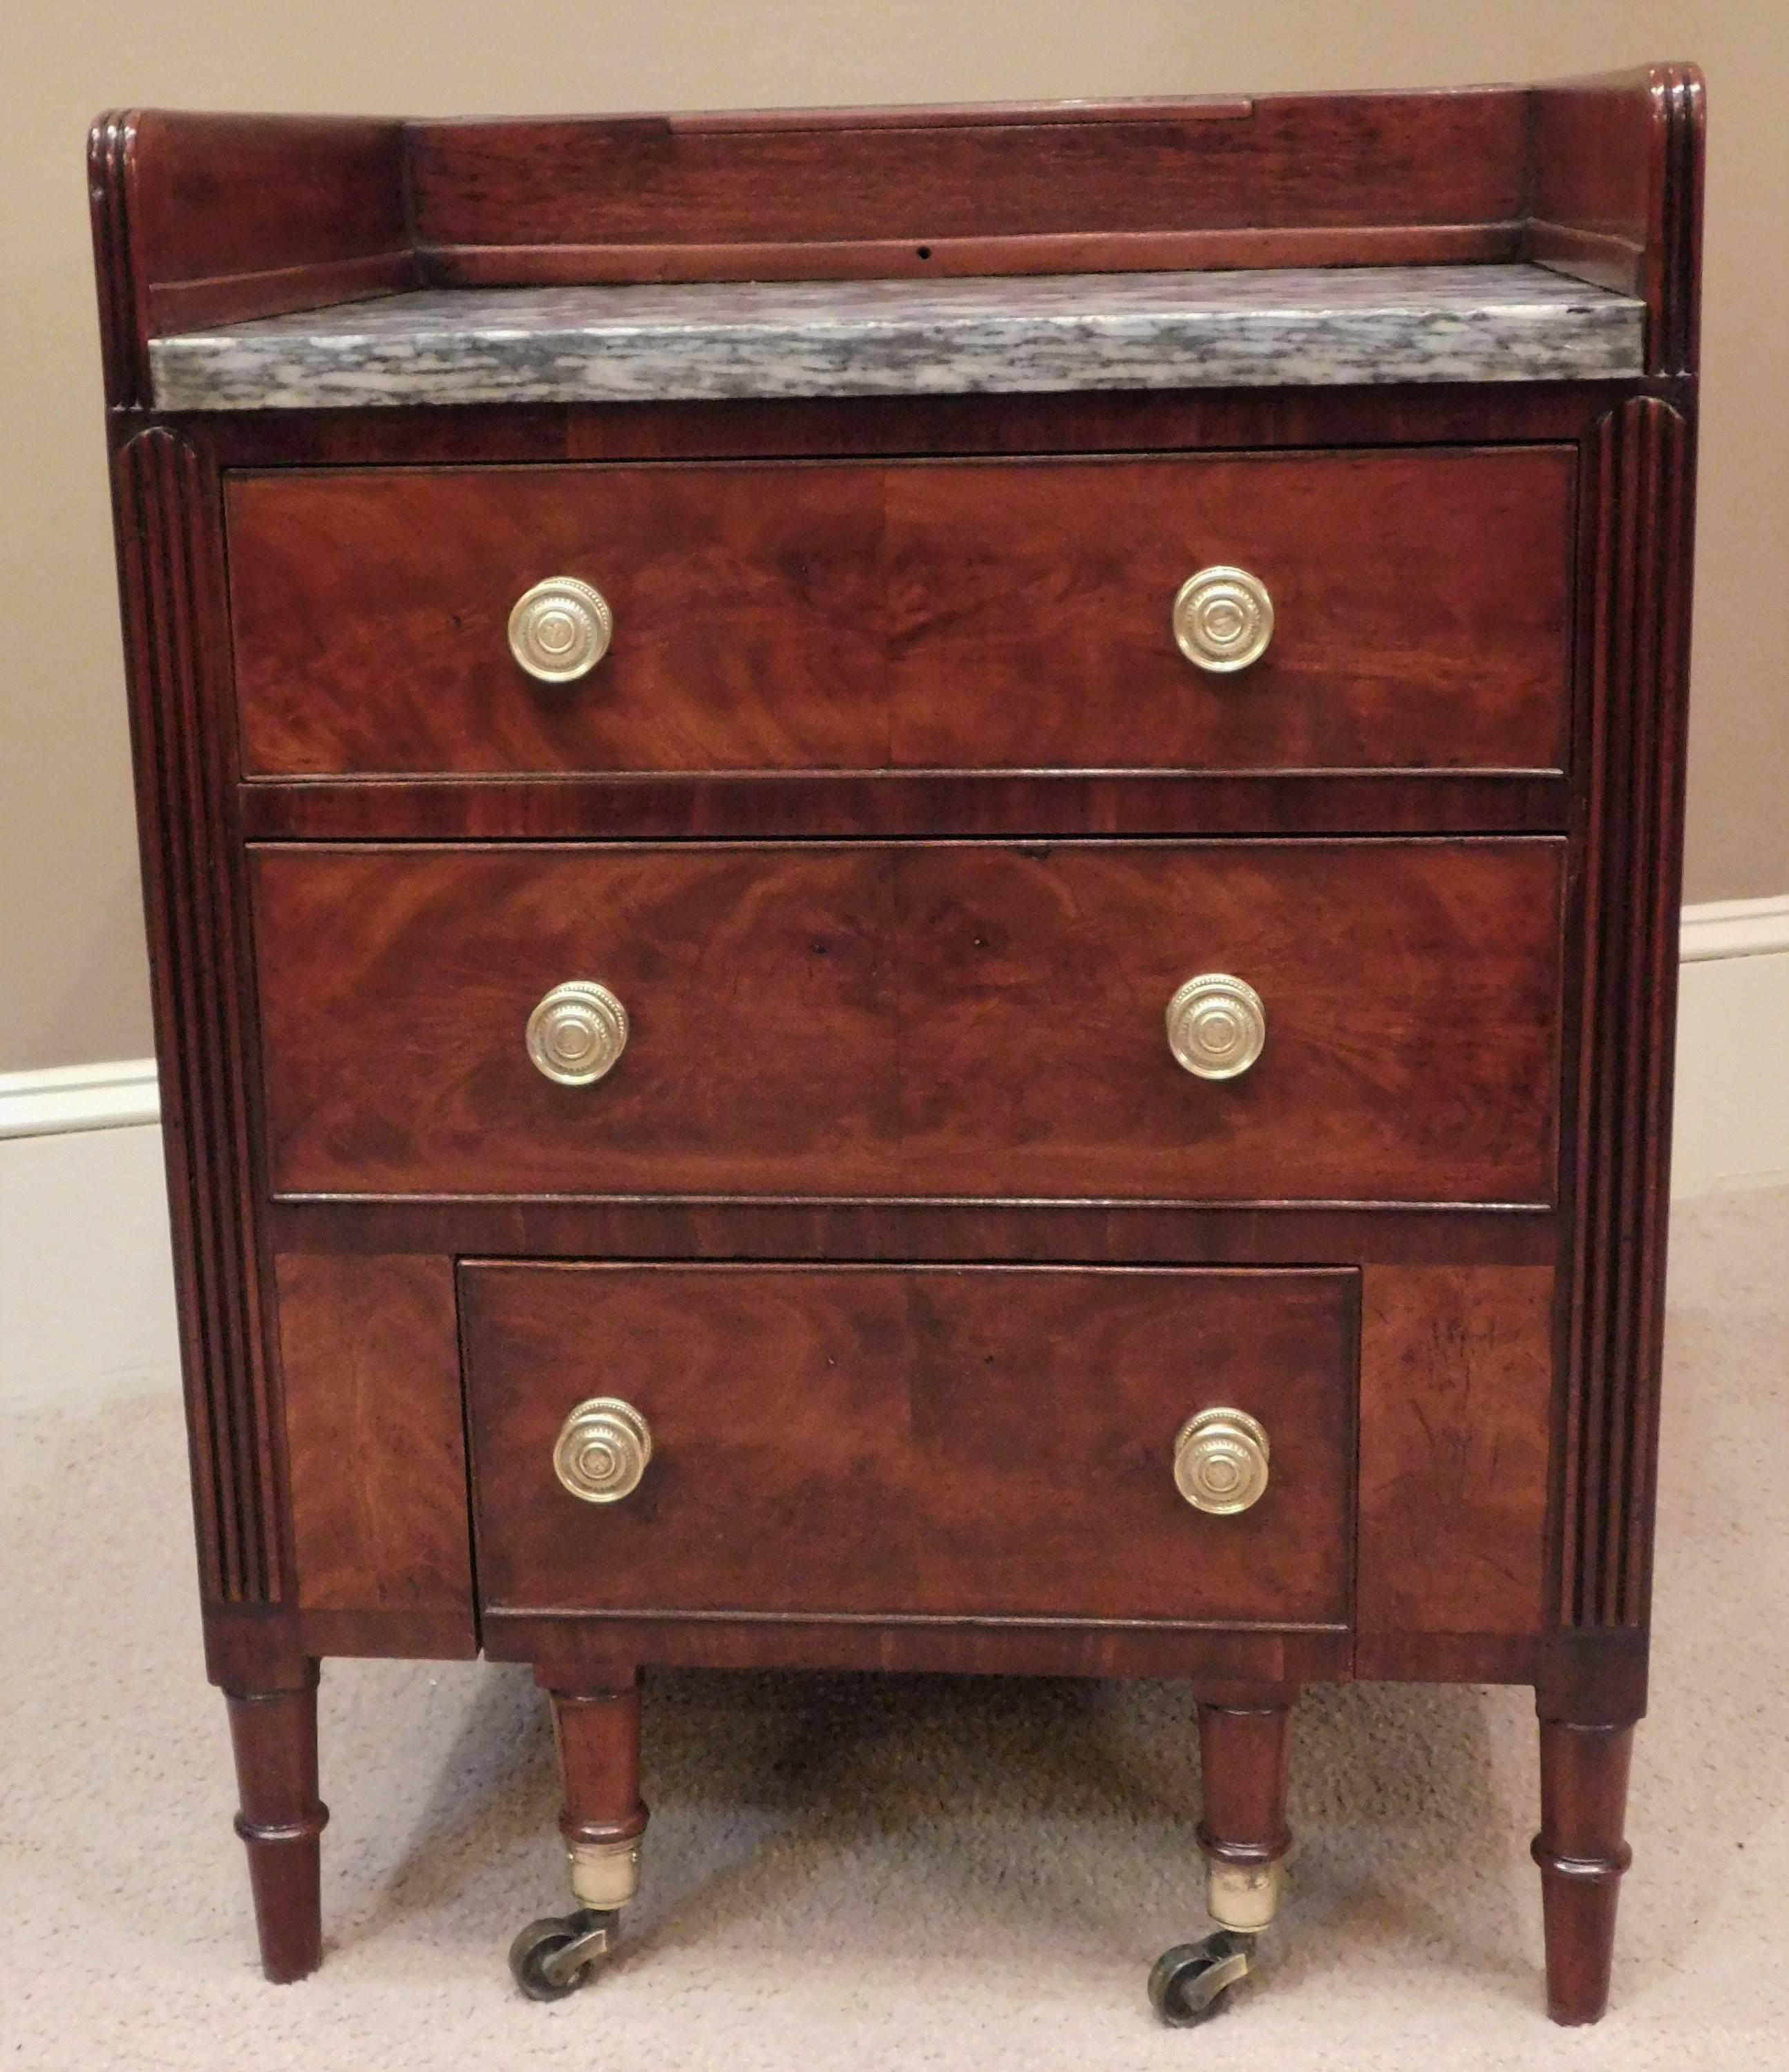 This wash stand and commode has its original French polished mahogany and figured mahogany veneer with poplar secondary wood, removable King of Prussia marble top, old replaced brass pulls, and original castors and potty. Raised reeded gallery with